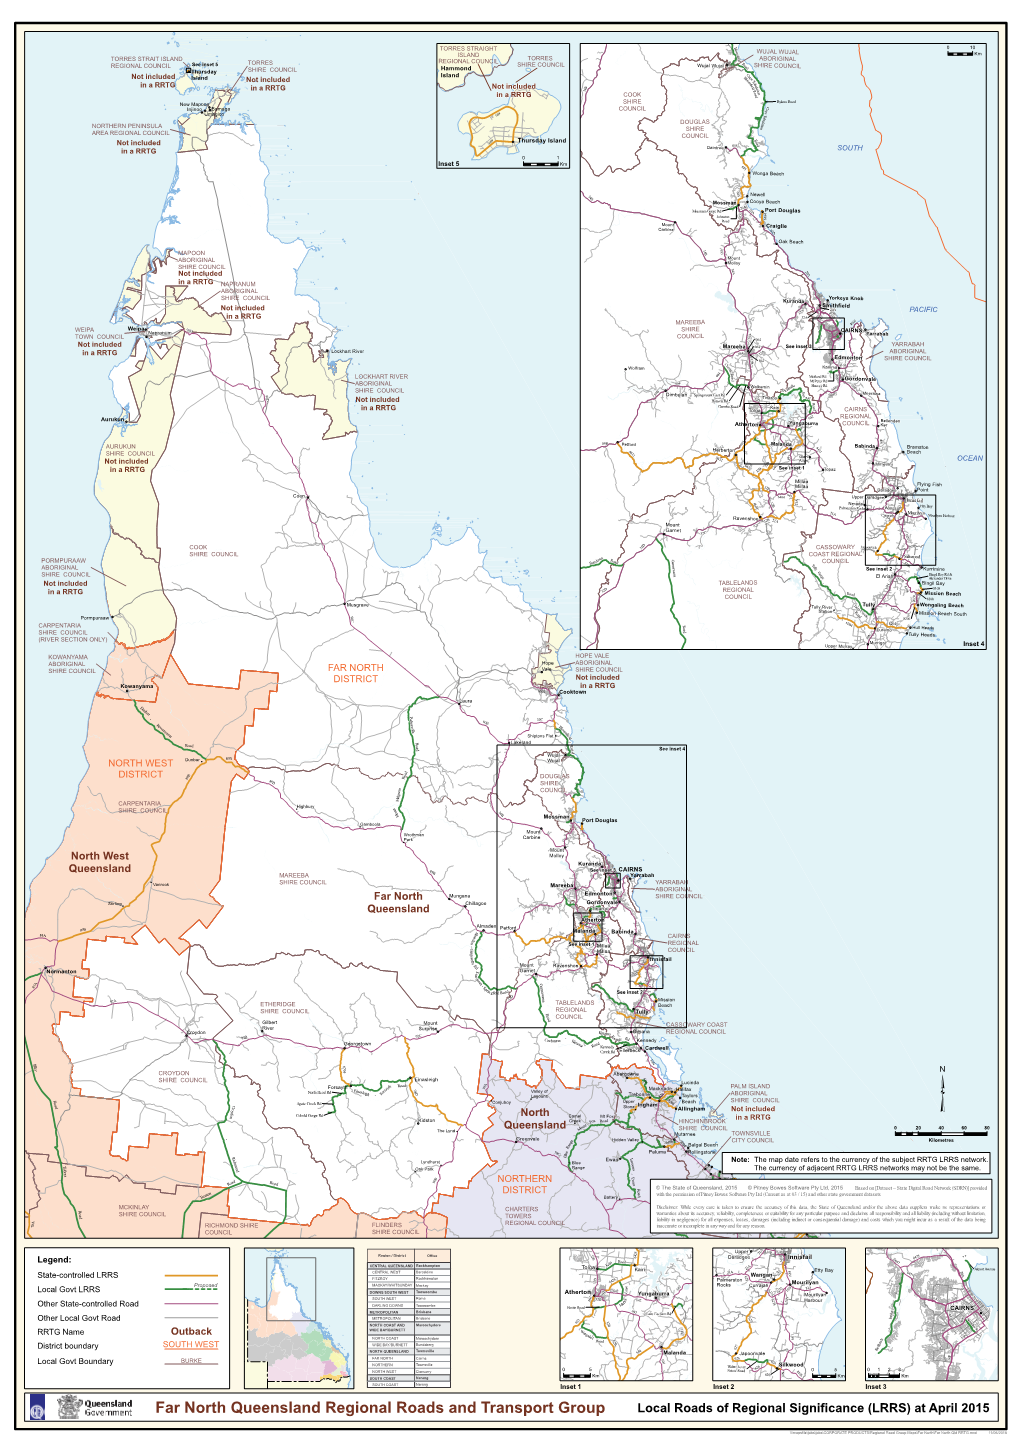 Far North Queensland Regional Roads and Transport Group Local Roads of Regional Significance (LRRS) at April 2015